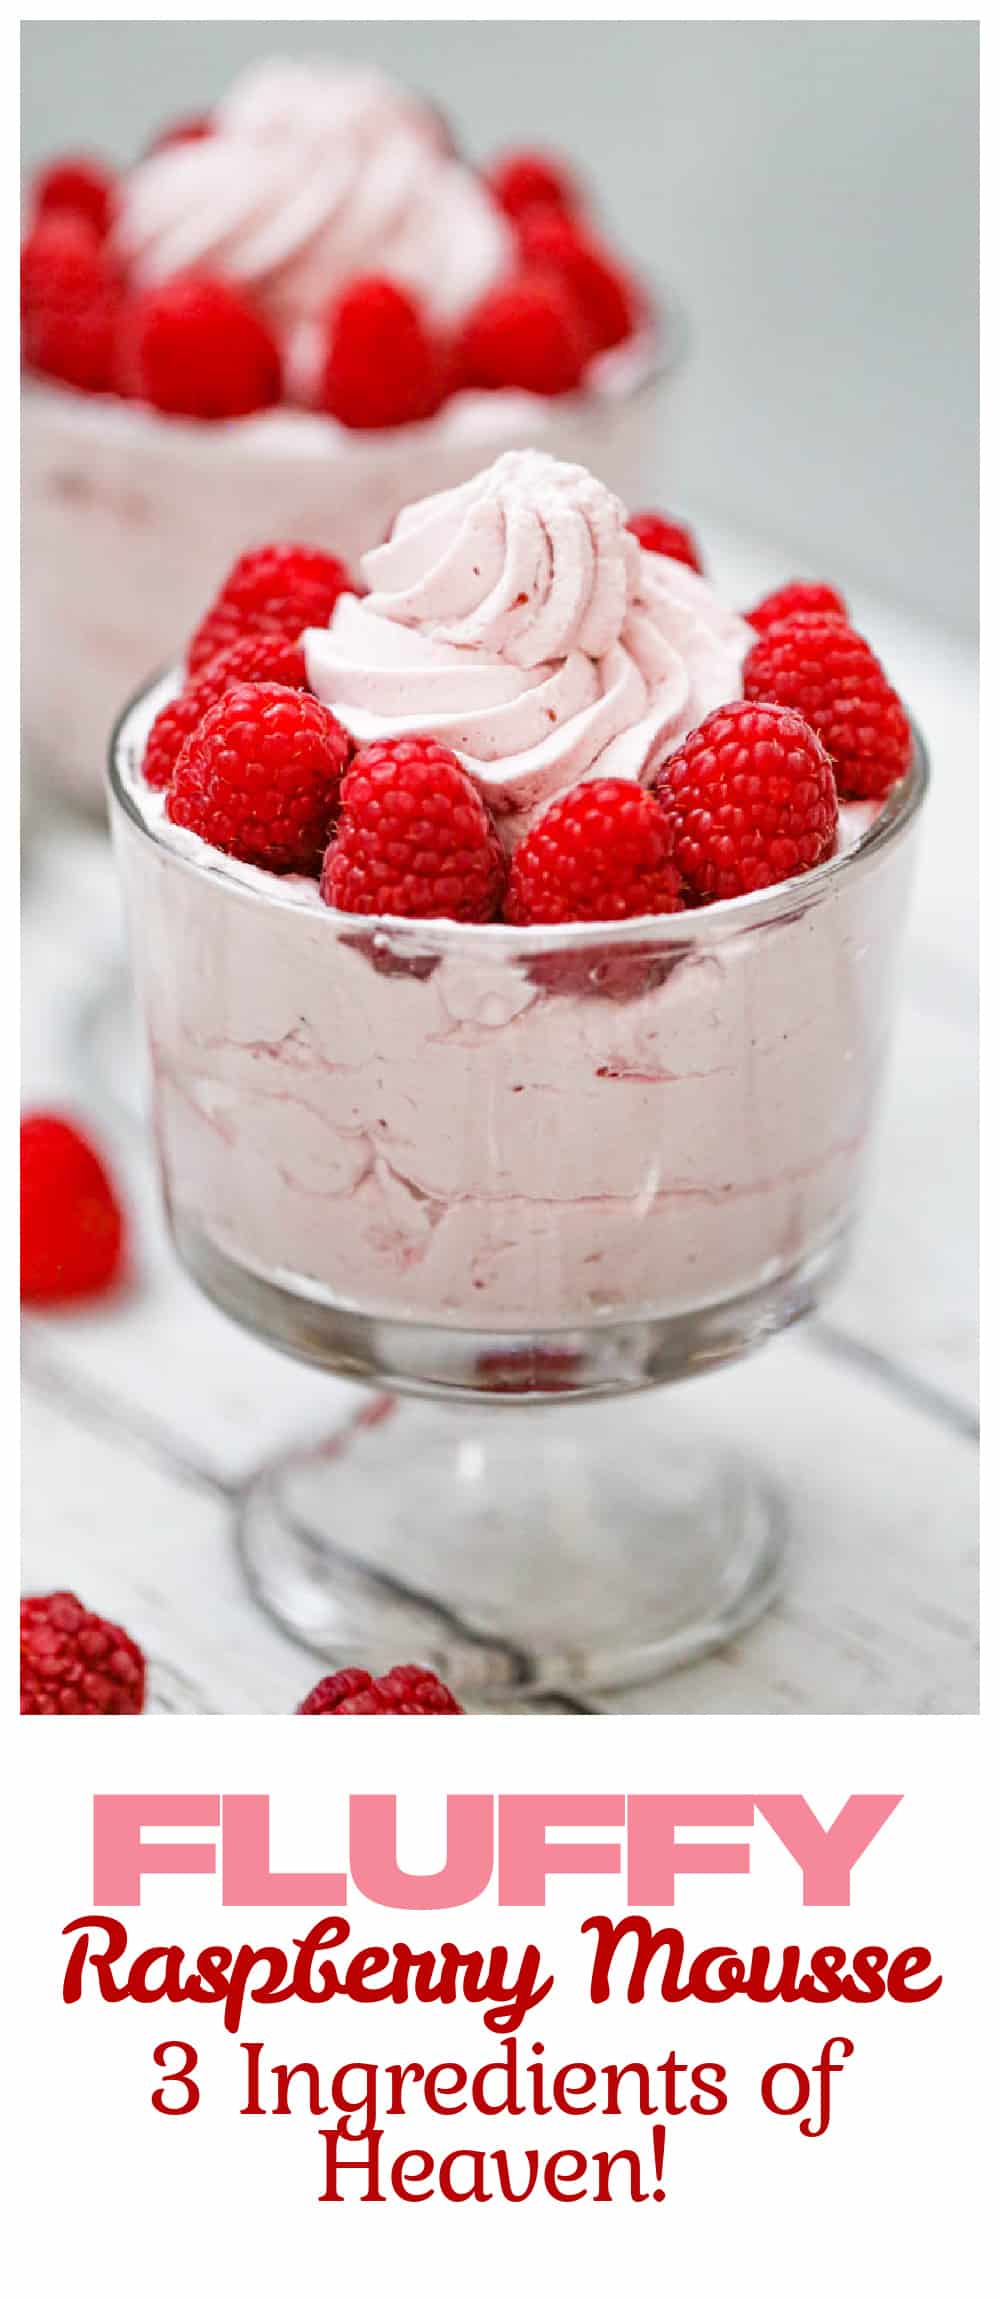 Fluffy Raspberry Mousse